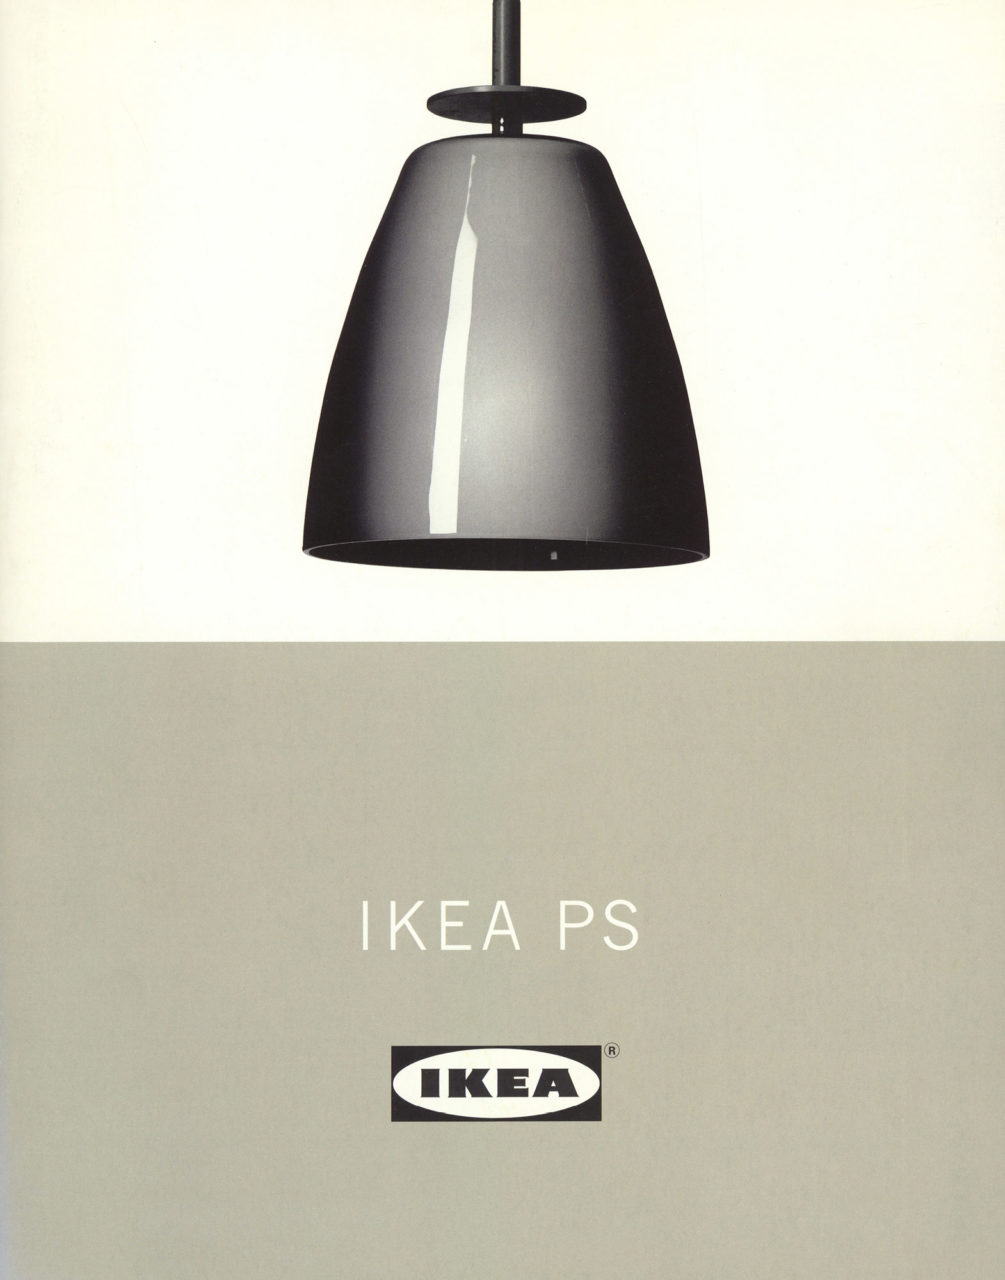 Cover of brochure for IKEA PS 1995 with photo of IKEA PS lamp and text IKEA PS on warm grey background.